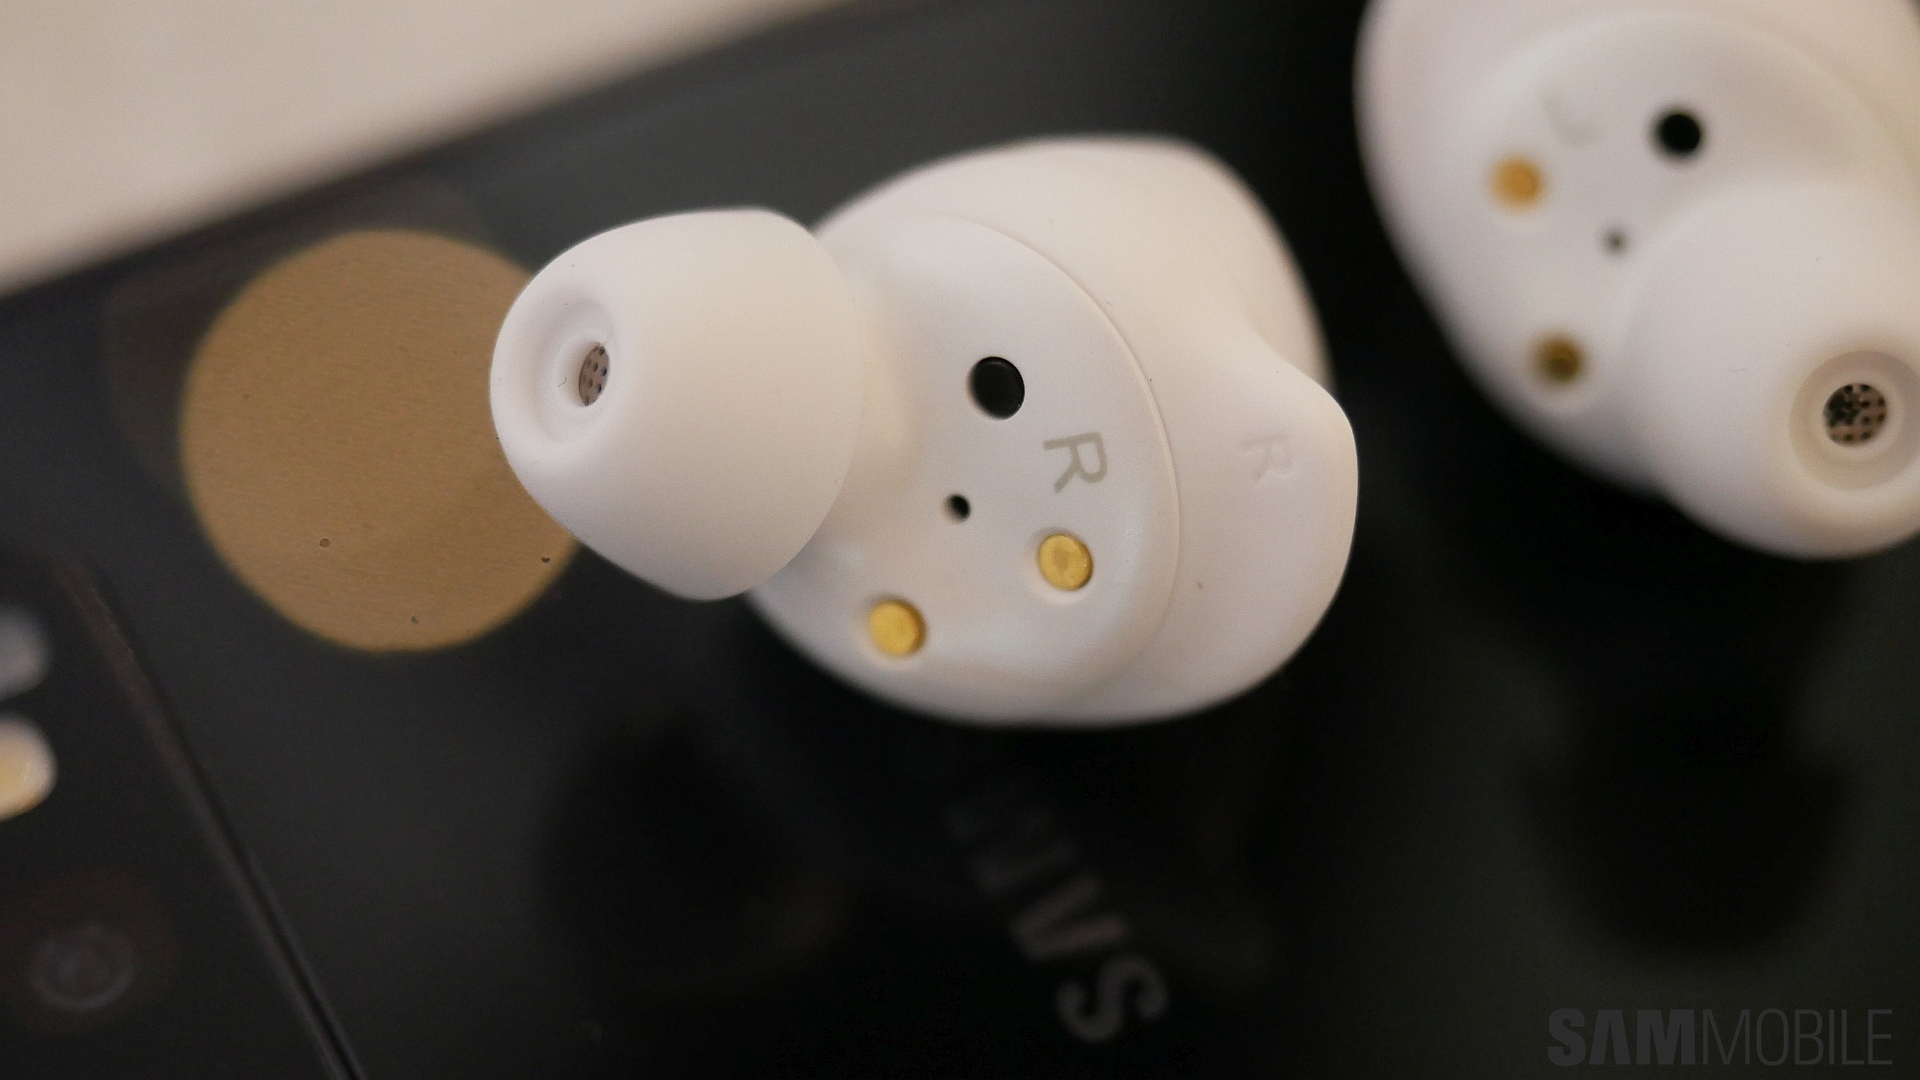 Galaxy Buds update with Buds+ features is now rolling out in Canada